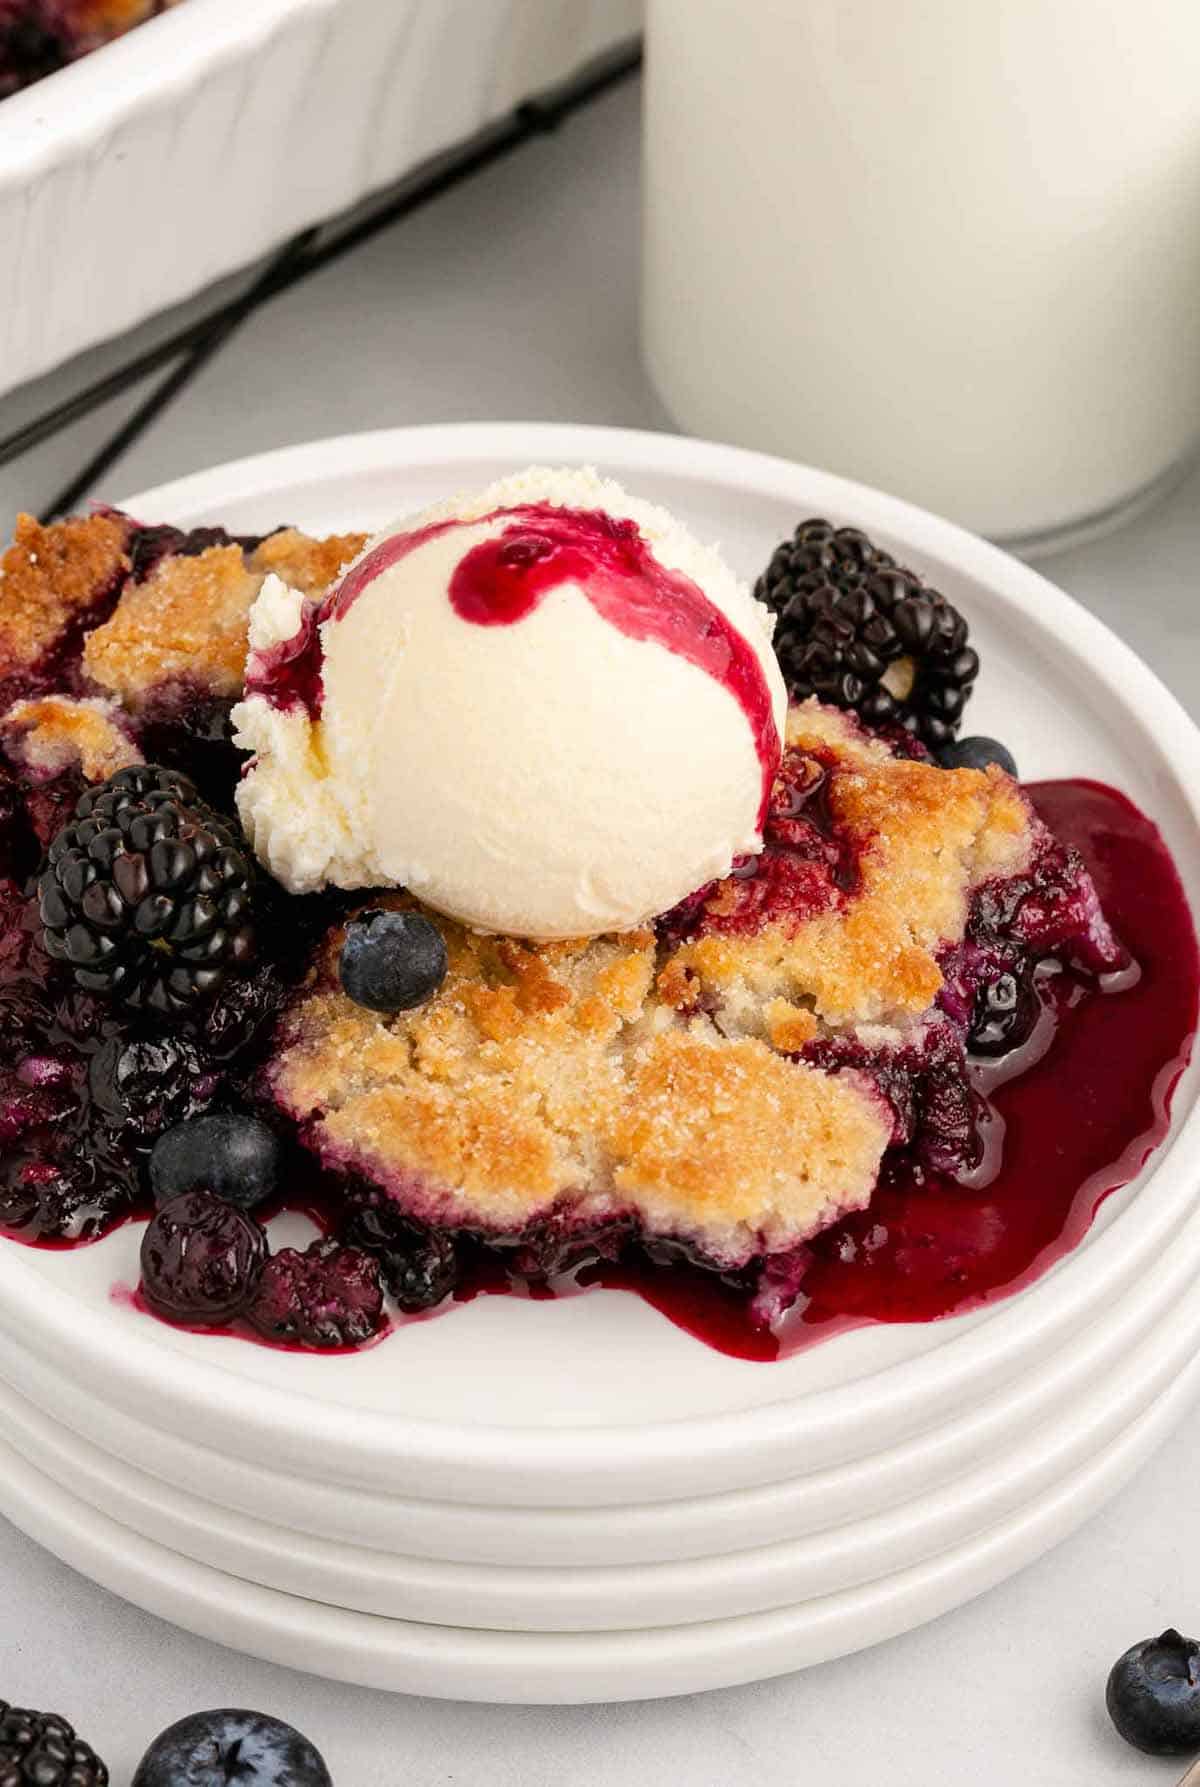 Southern berry cobbler served on a white plate with a scoop of ice cream on top.